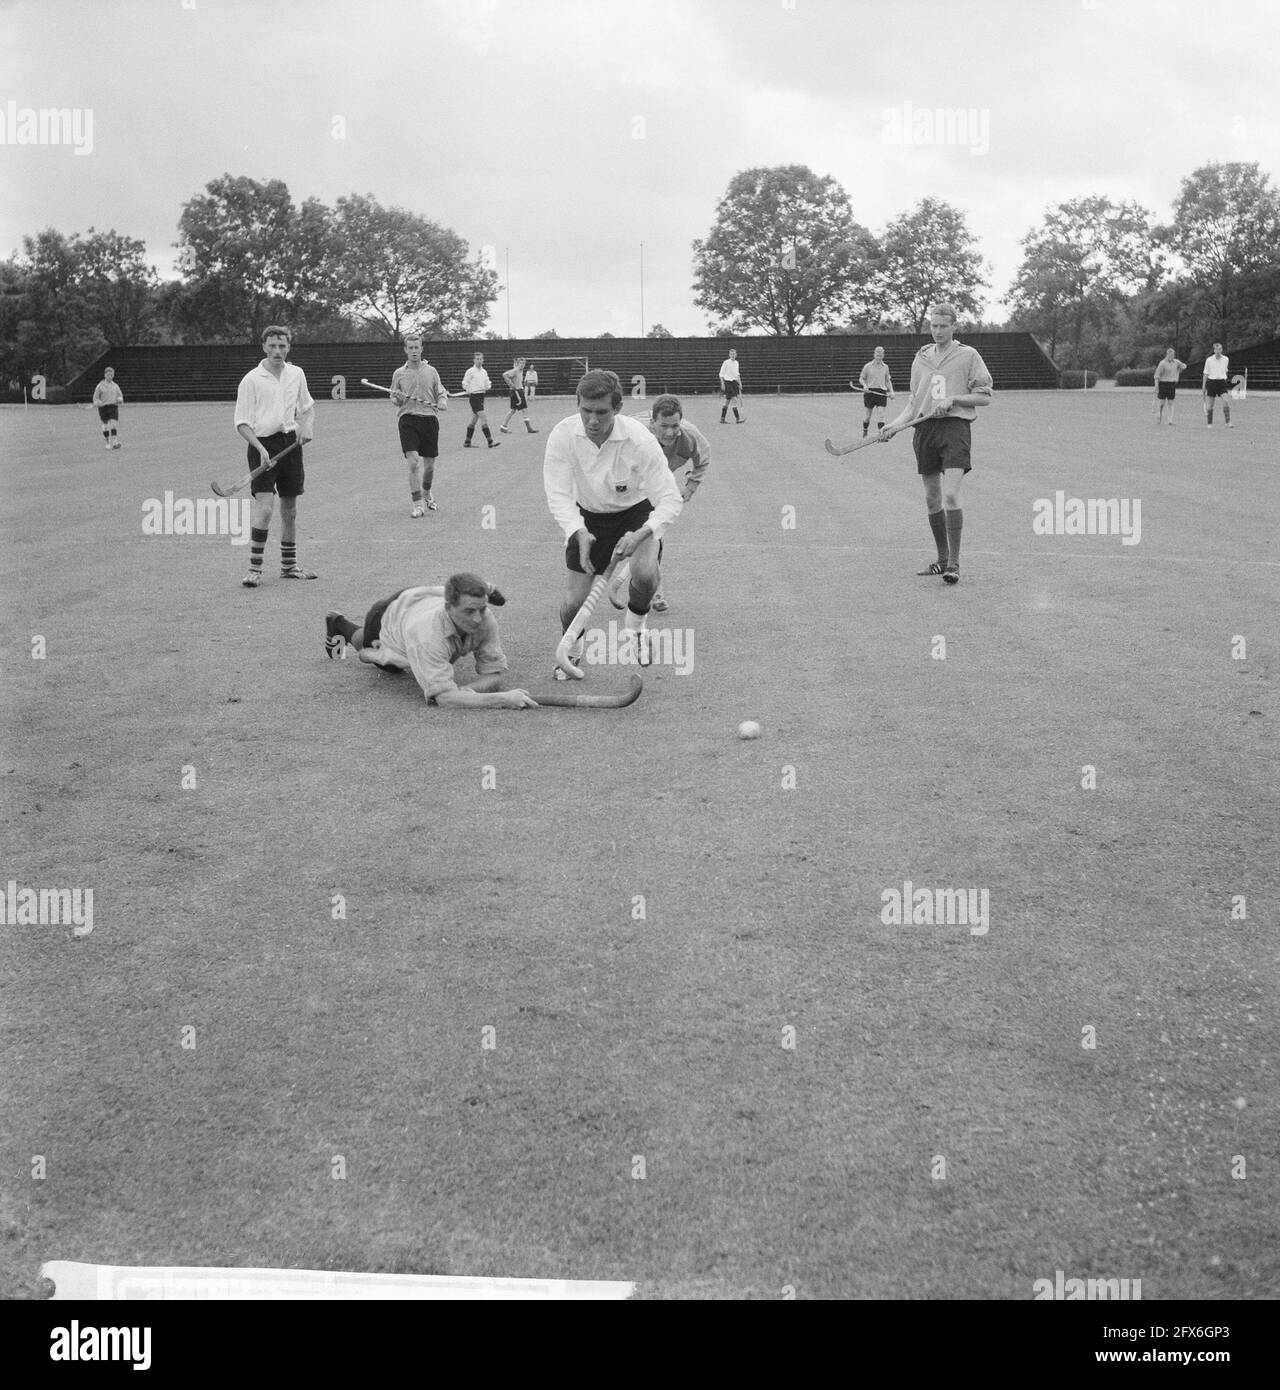 Hockey ASC against Rest of the Netherlands as part of the Lustrumfeesten (game moment), June 28, 1962, field hockey, lustrumfeesten, The Netherlands, 20th century press agency photo, news to remember, documentary, historic photography 1945-1990, visual stories, human history of the Twentieth Century, capturing moments in time Stock Photo